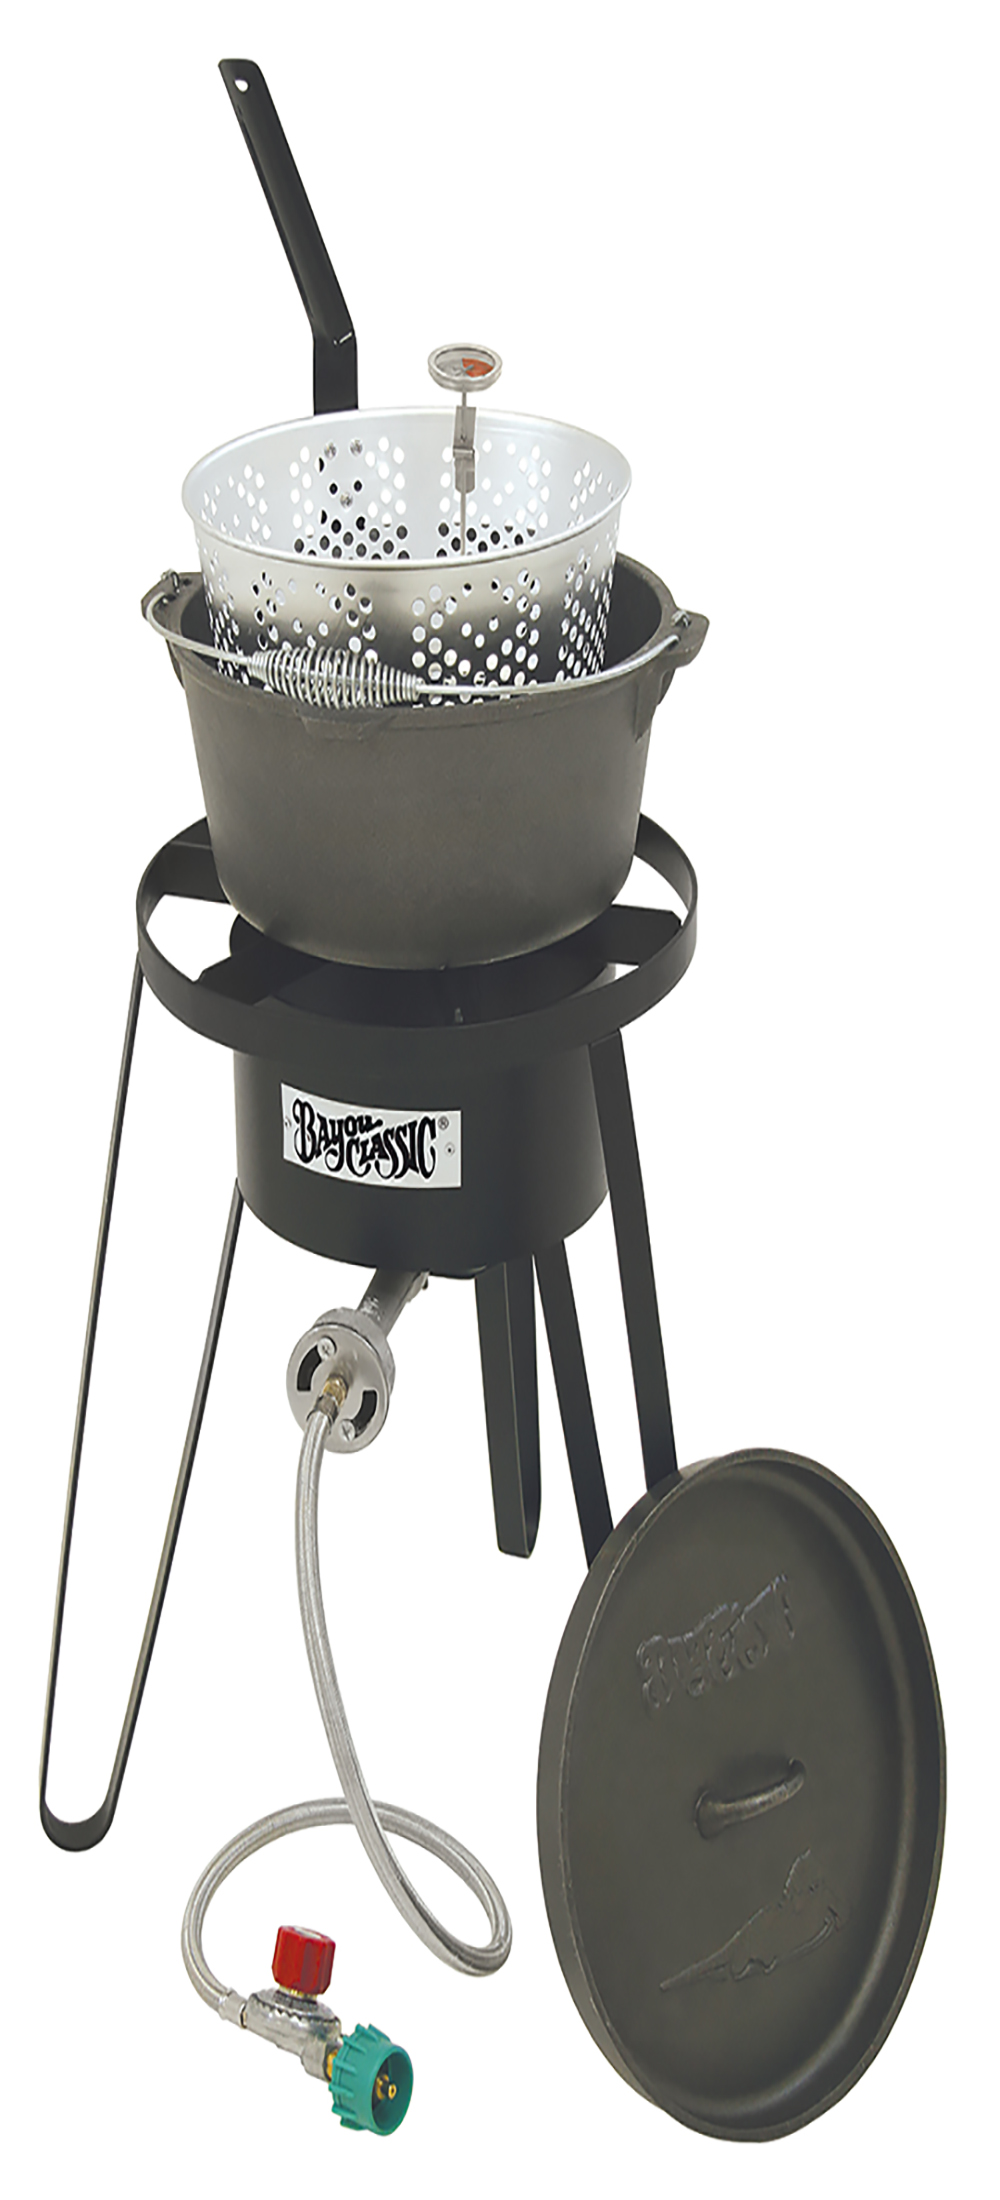 B159 Outdoor Fish Cooker - 21 Inch Tall Frame With Cast Iron Fry Pot